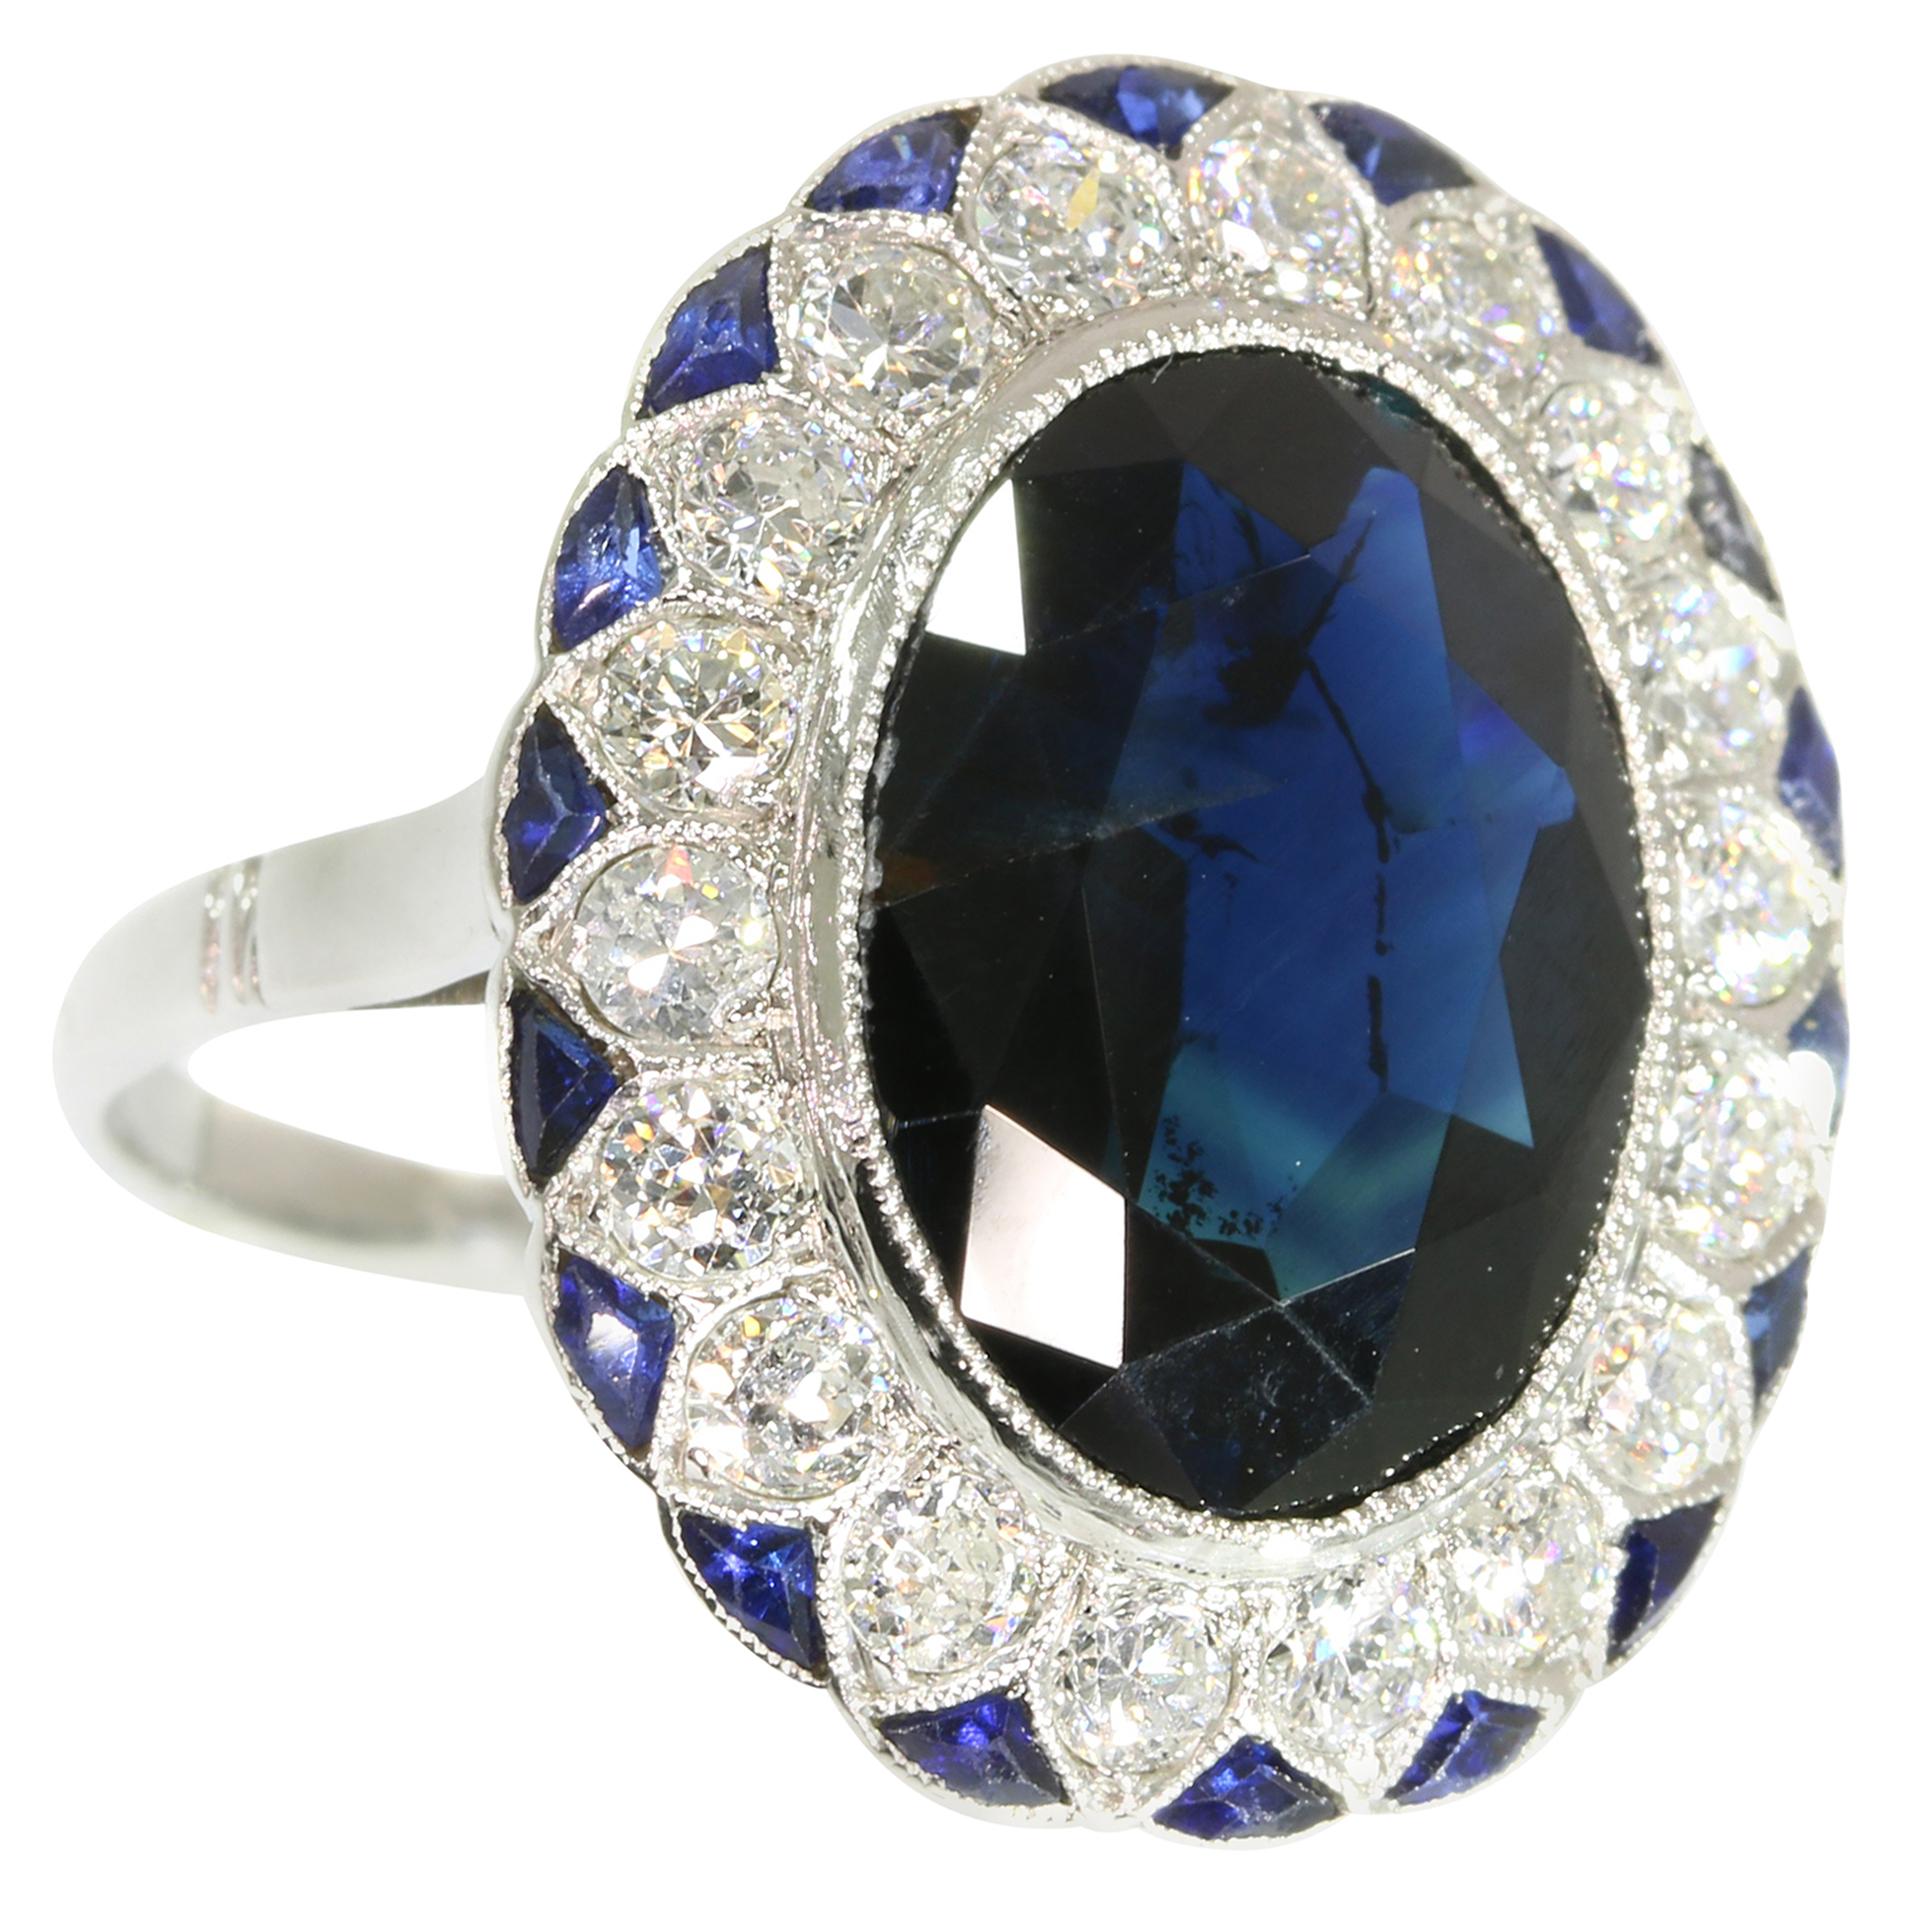 From the first glance, it’s clear that this Art Deco platinum engagement ring from 1920 emanates nobility. In resemblance of the Lady Di ring, the deep blue of a natural oval cut sapphire springs from between 18 surrounding old European cut diamonds